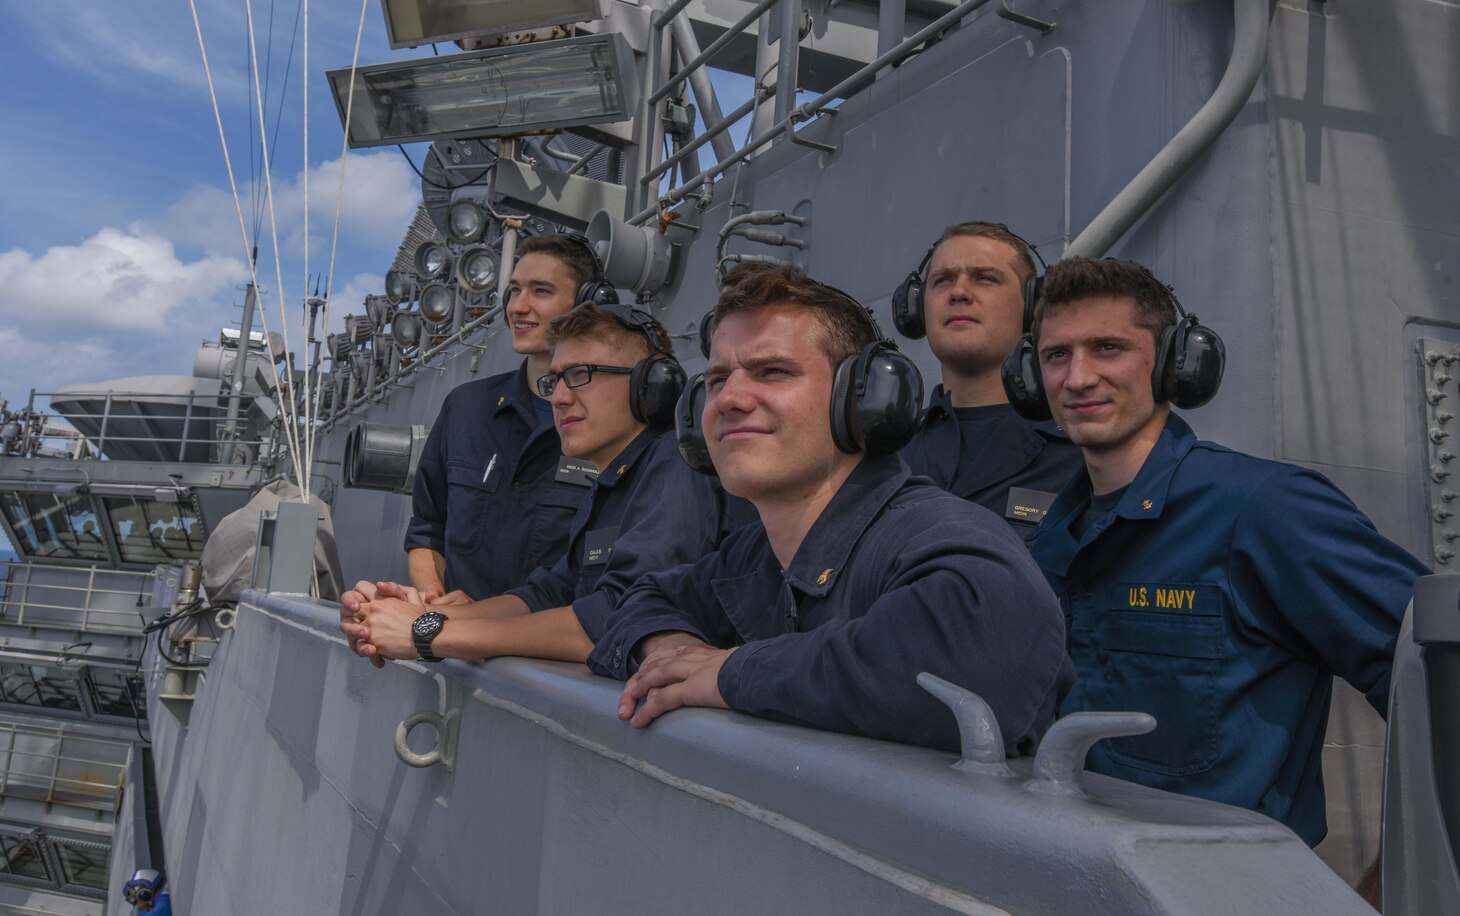 Midshipmen observe flight operations on the Navy's forward-deployed aircraft carrier, USS Ronald Reagan (CVN 76), during their summer cruise. Ronald Reagan, the flagship of Carrier Strike Group 5, provides a combat-ready force that protects and defends the collective maritime interests of its allies and partners in the Indo-Pacific region.